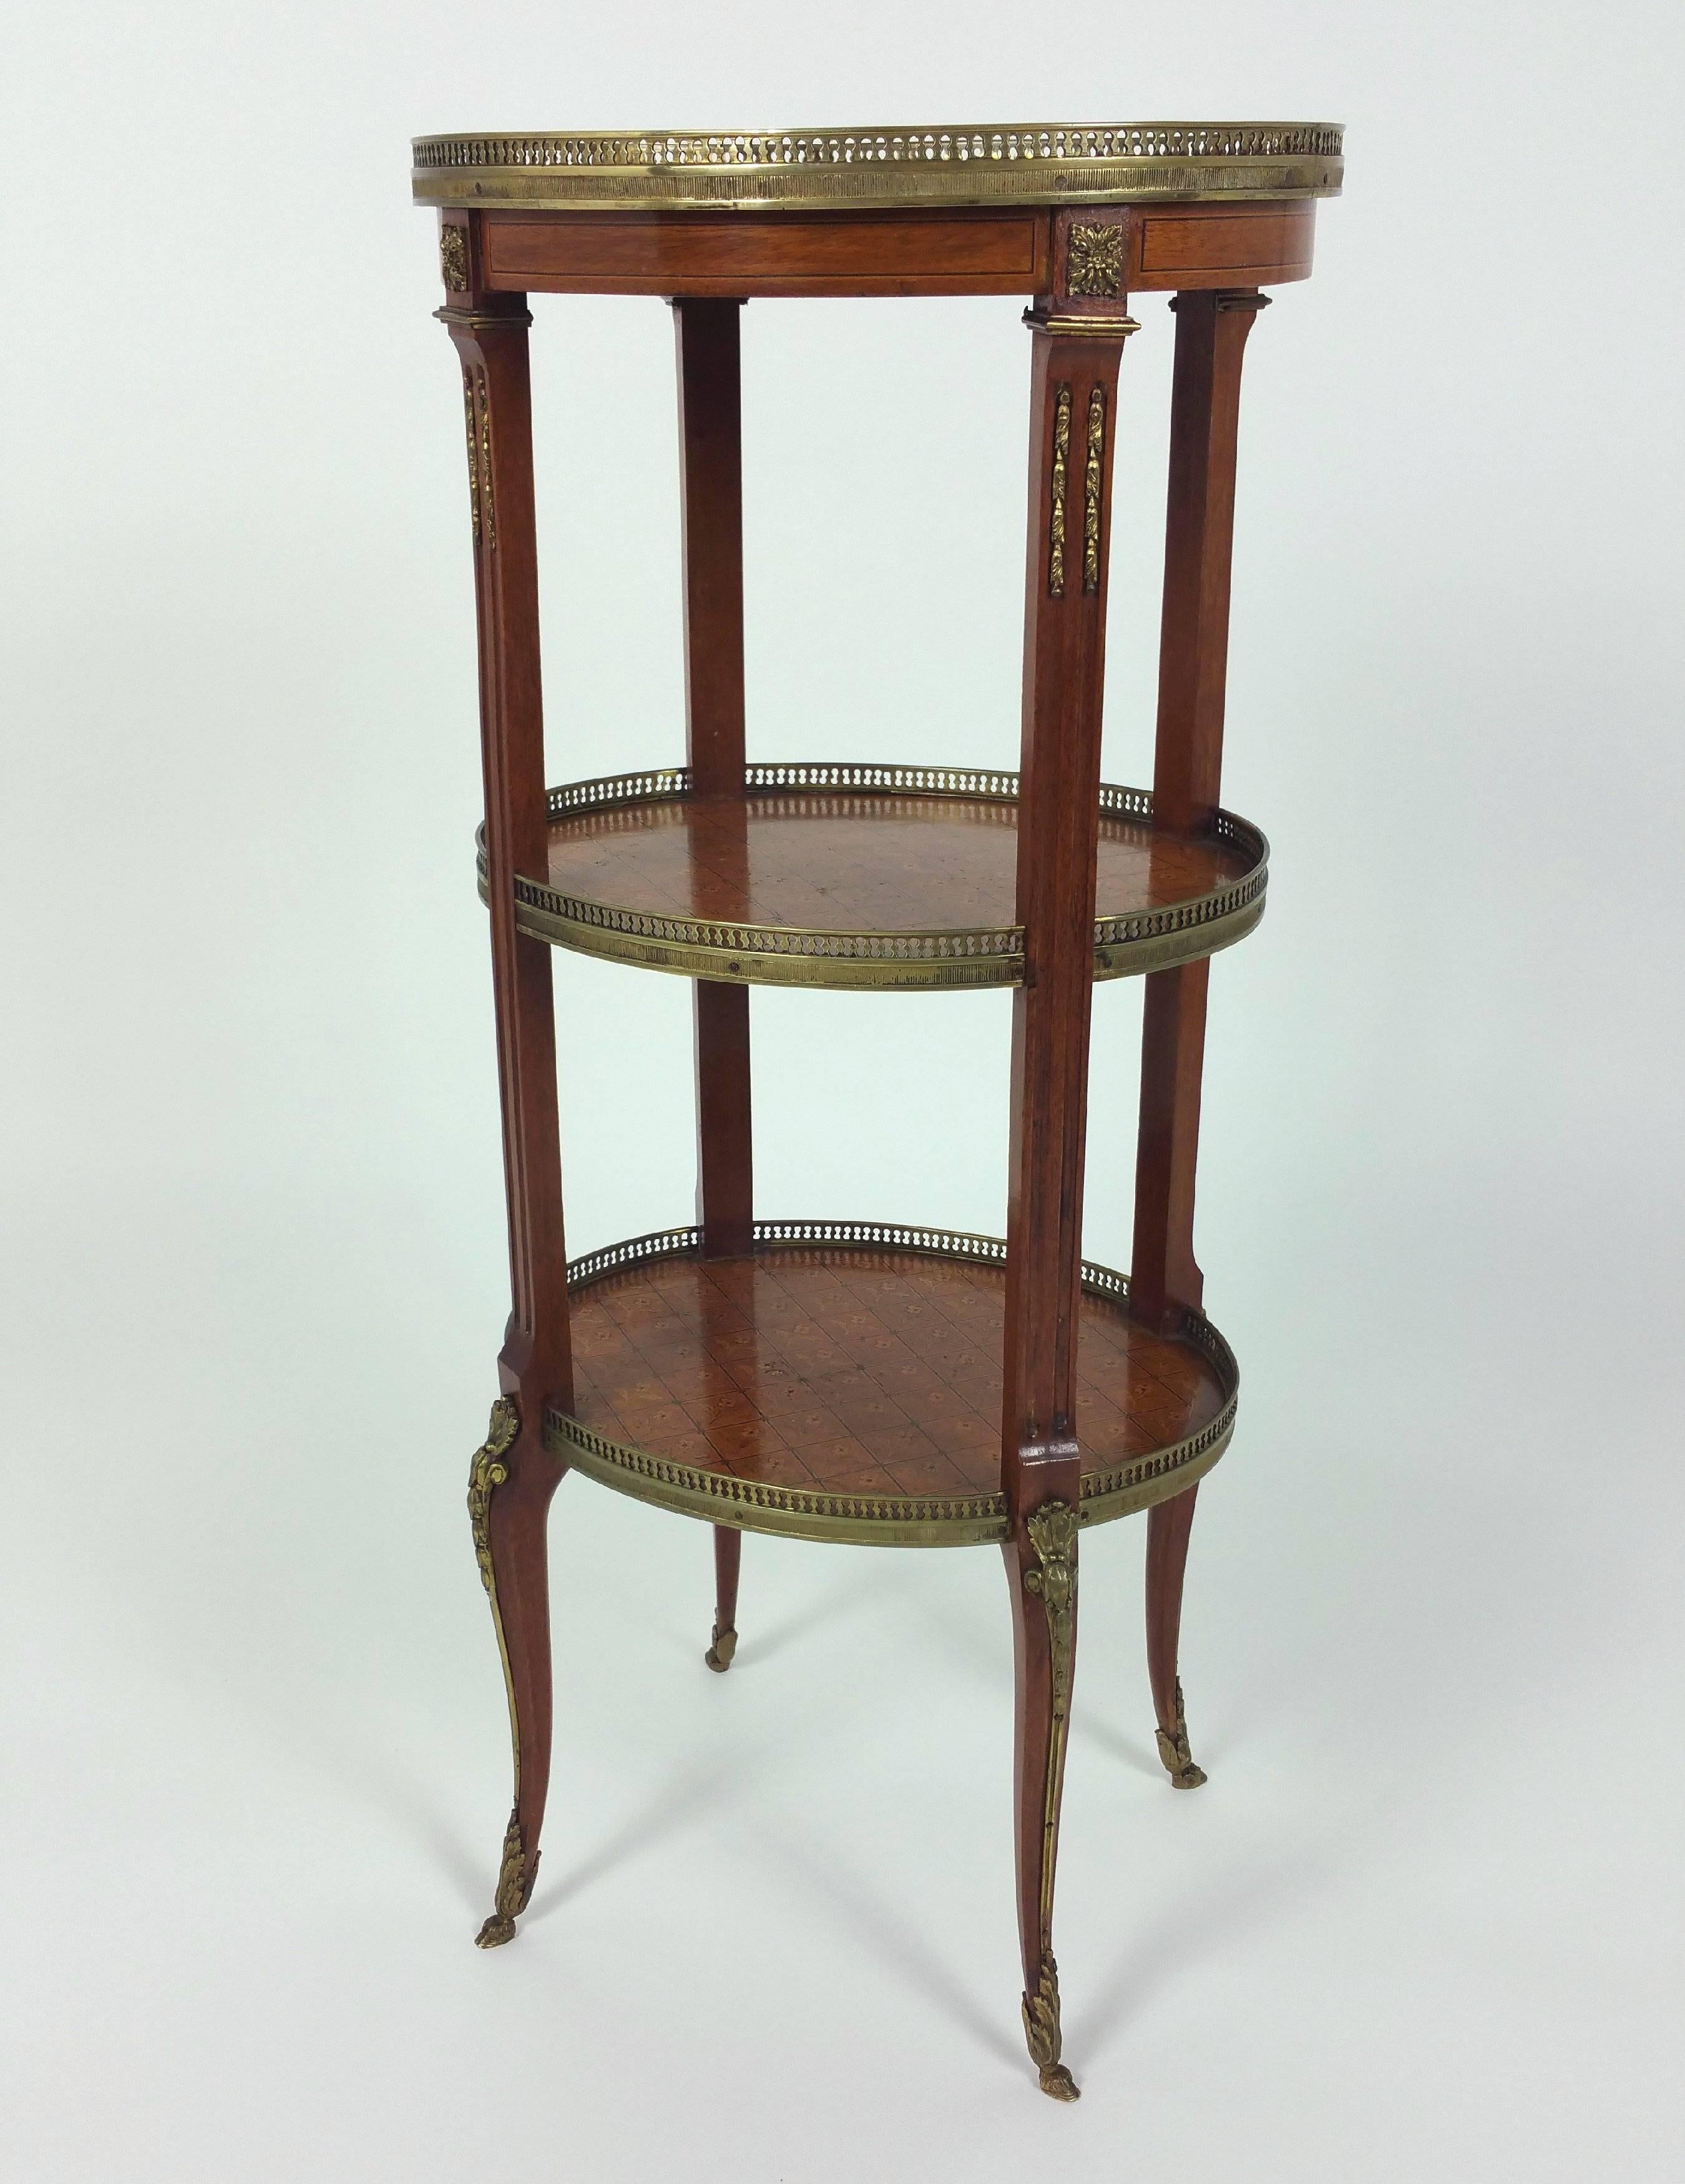 Pair of French Marquetry Inlaid Kingwood Three-Tier Étagères In Excellent Condition In London, west Sussex